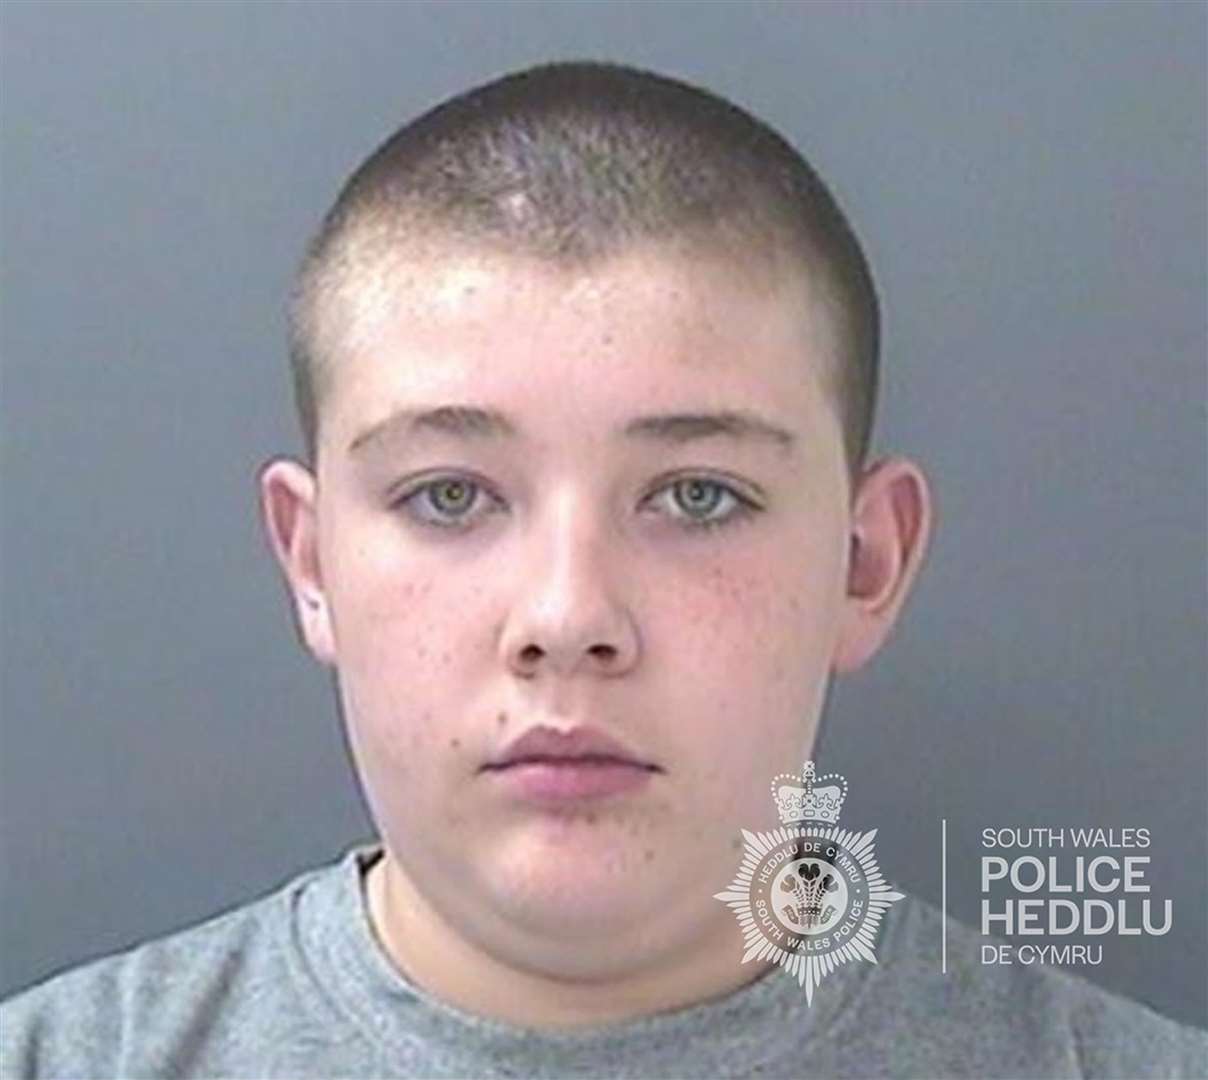 Craig Mulligan was sentenced to a minimum of 15 years’ detention for Logan Mwangi’s murder (South Wales Police/PA)